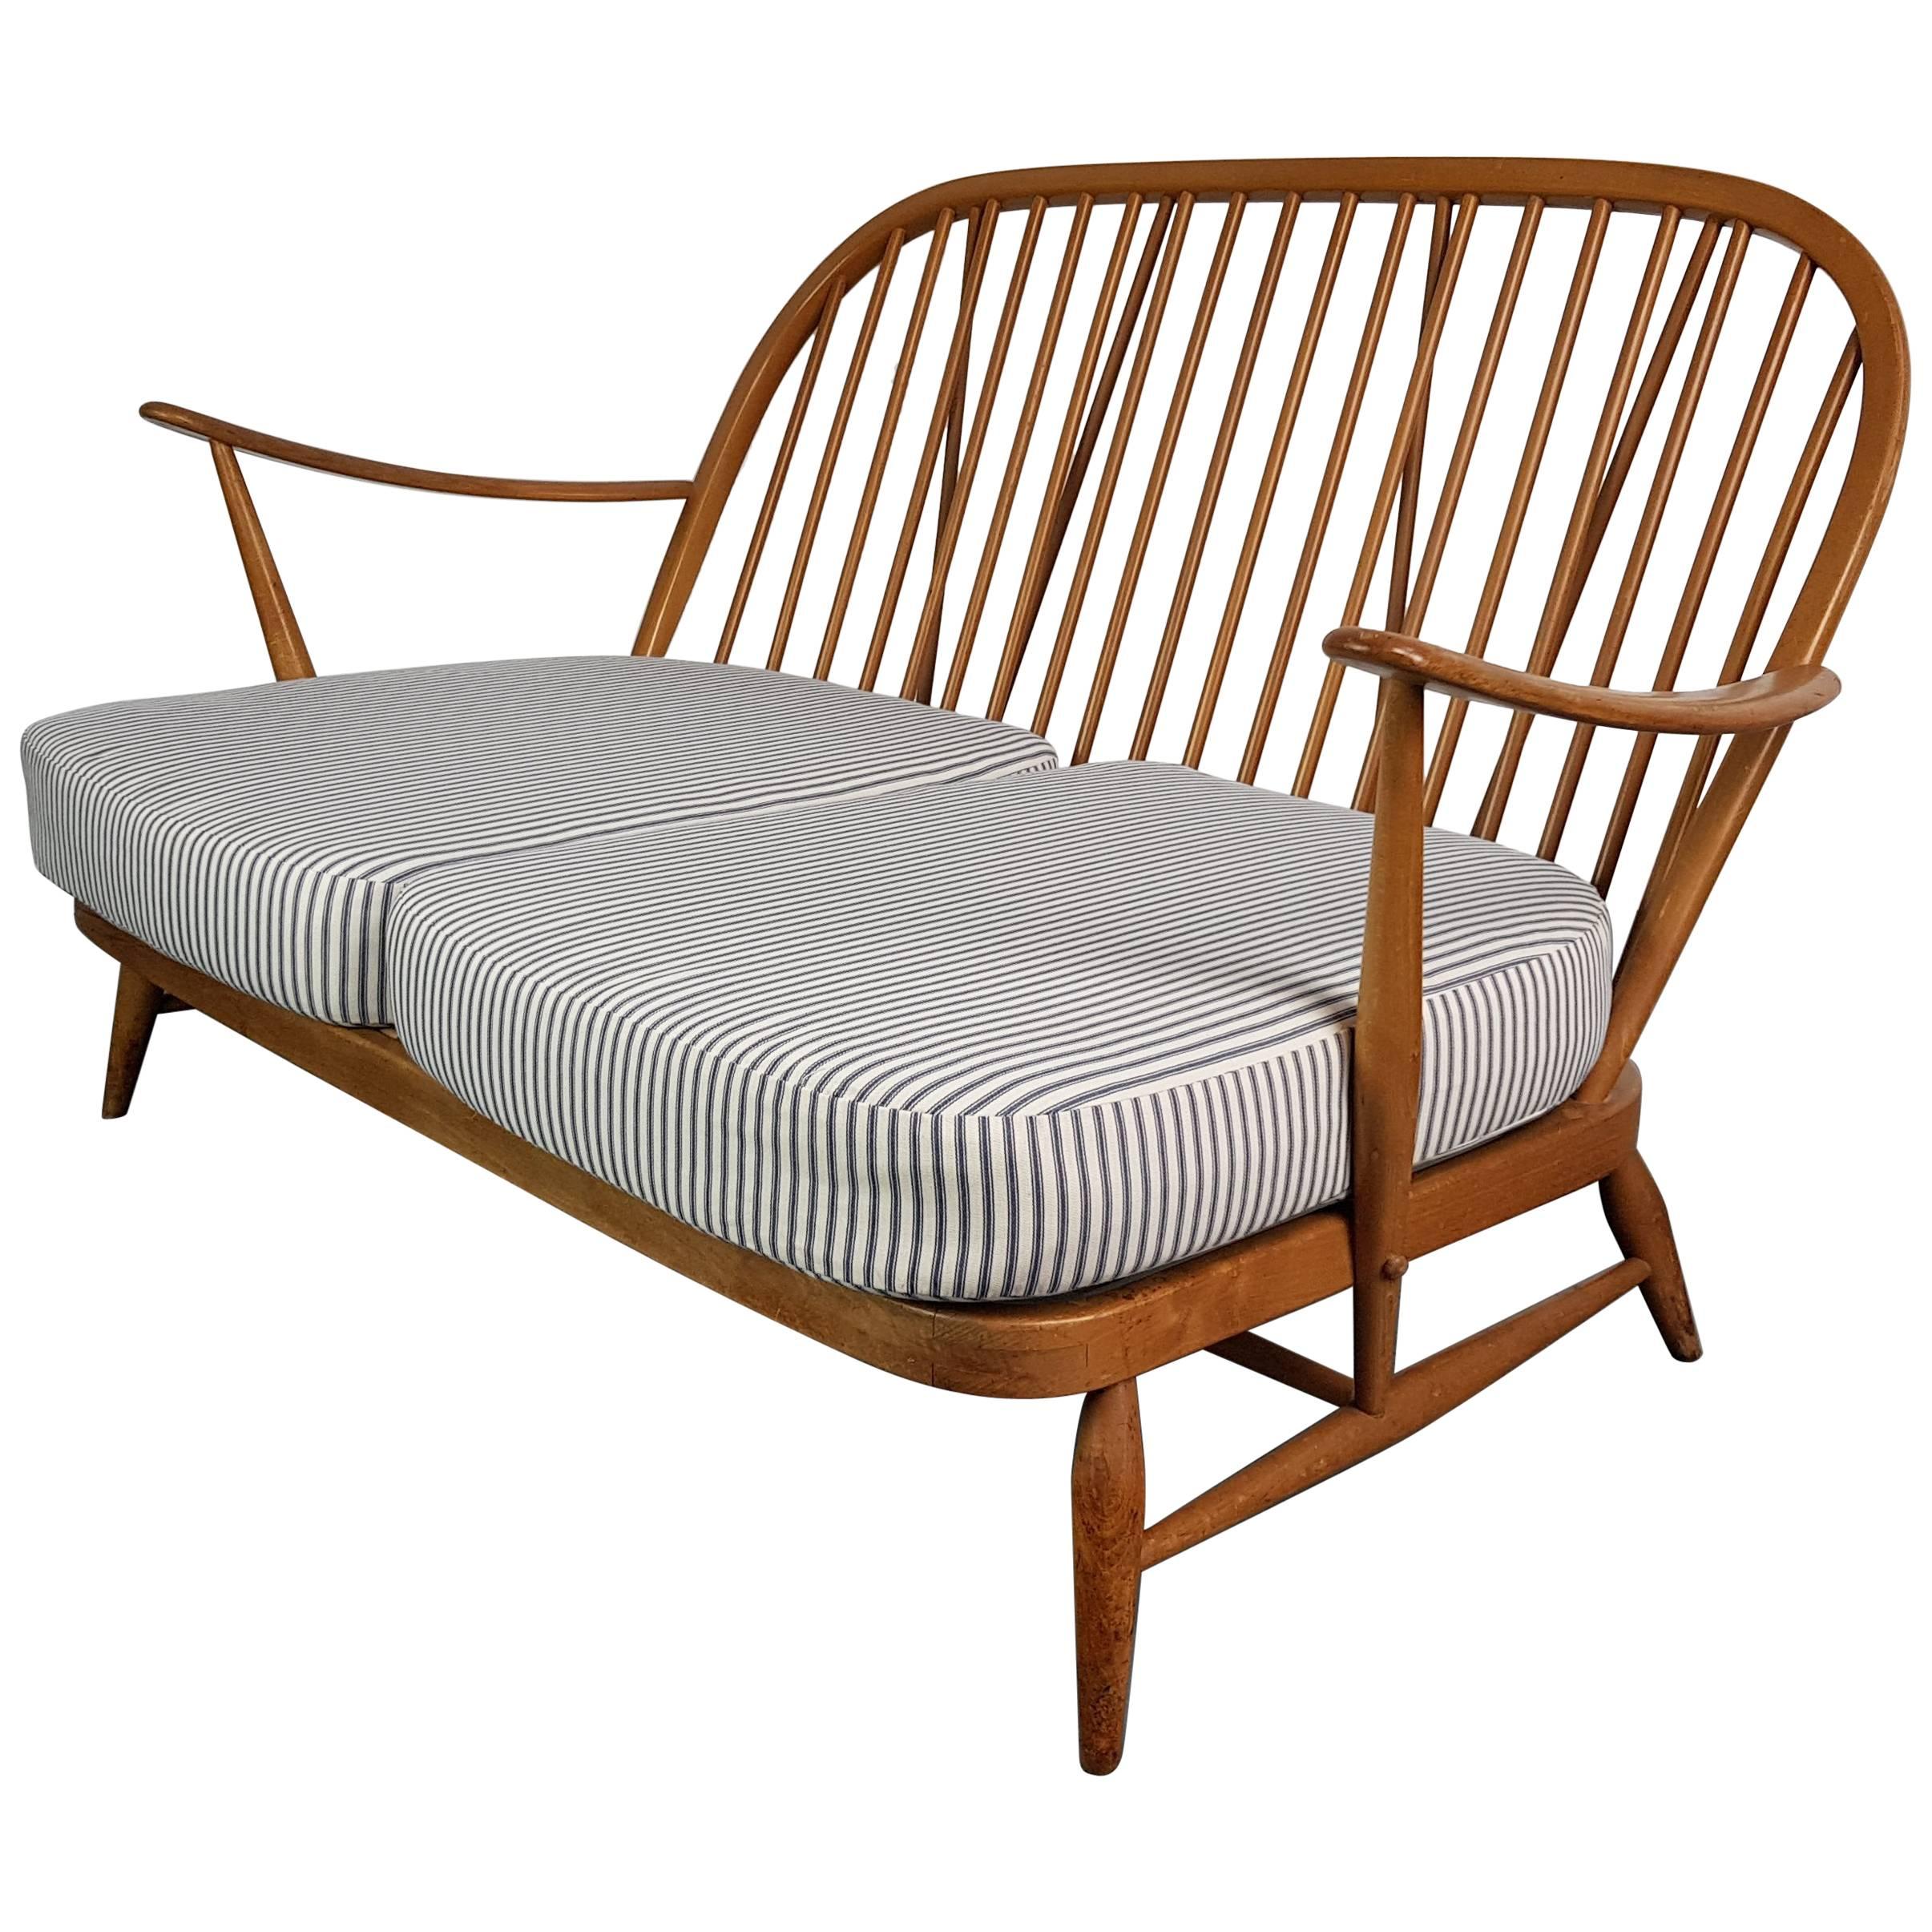 Refurbished Vintage Ercol Windsor Two-Seat Sofa Upholstered in French Ticking